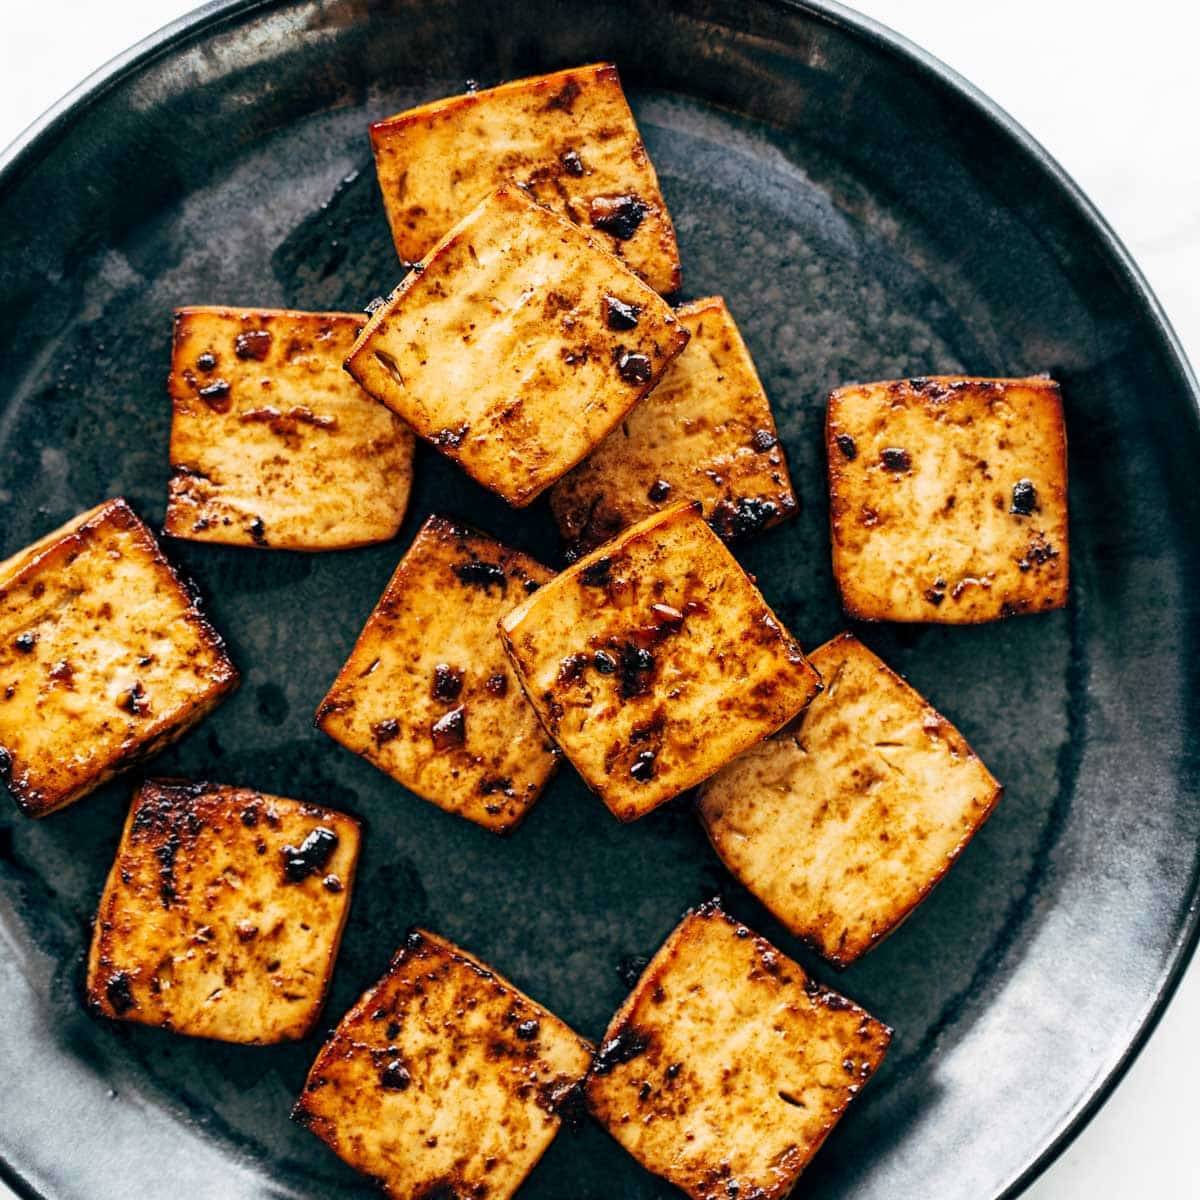 Step 5: Baked Tofu can be served as a main dish or added to noodle bowls, r...